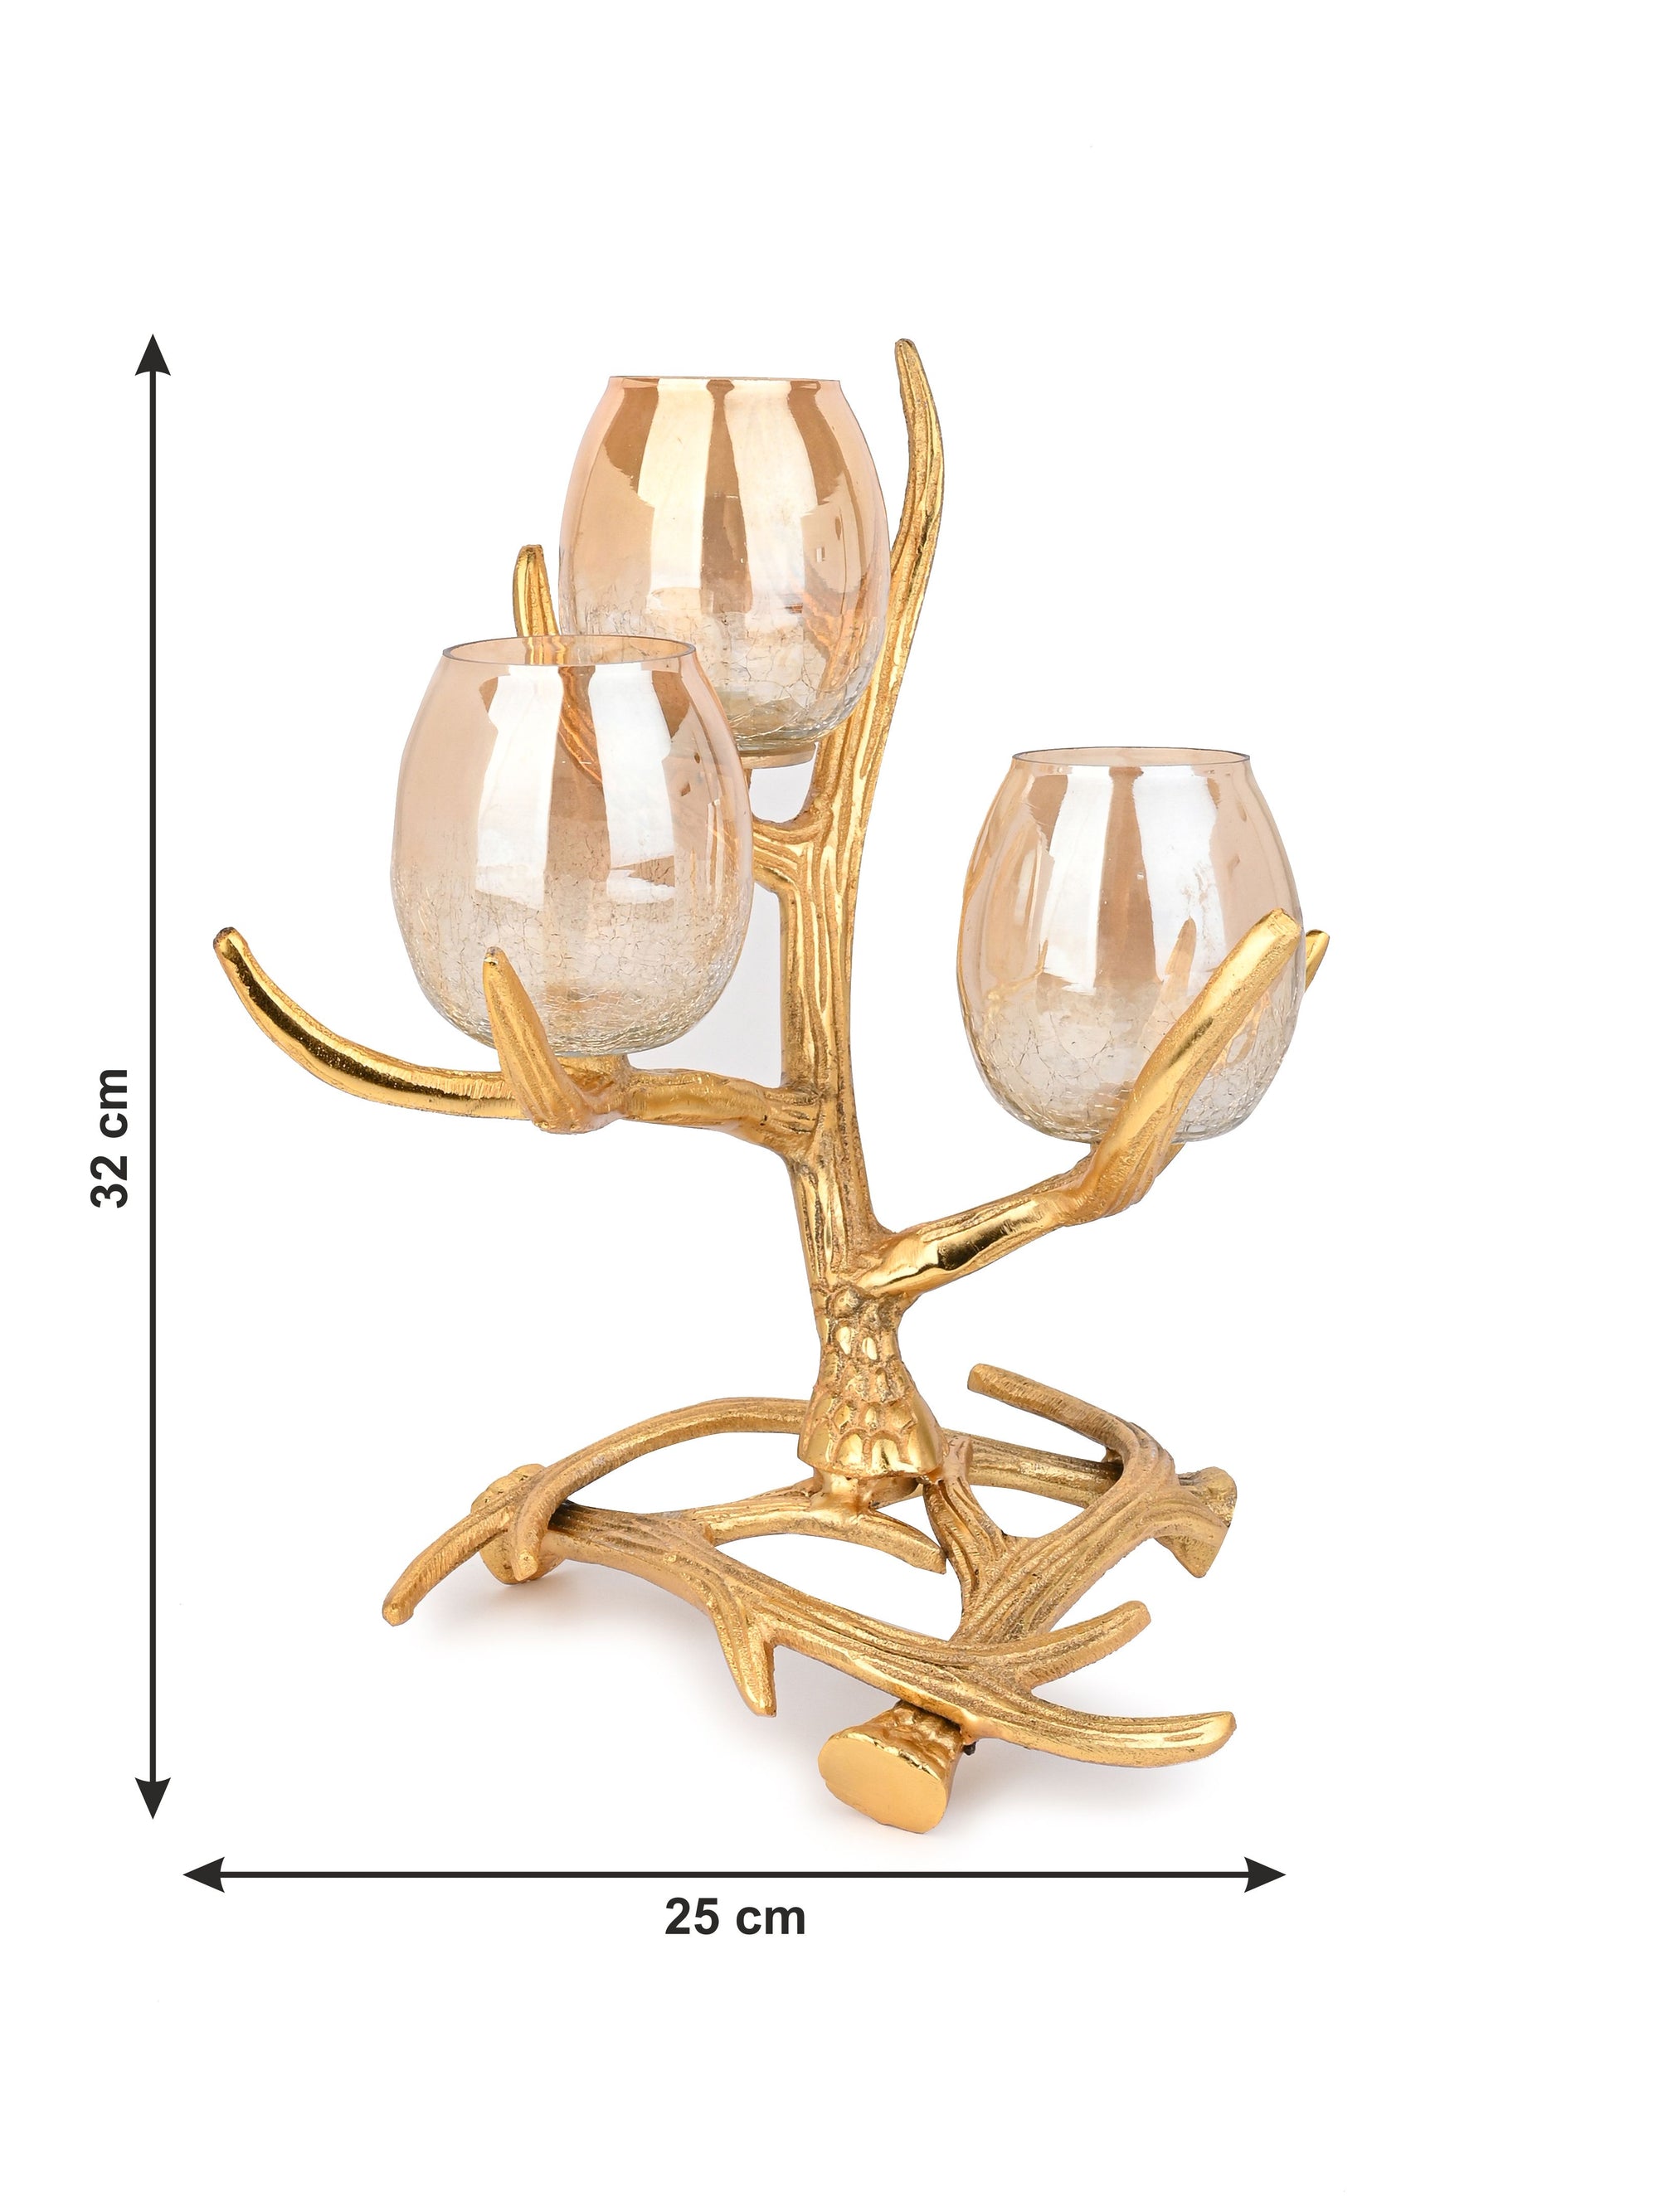 3 piece Glass Candle Holder on a Abstract Branches Design Stand - 12 inches